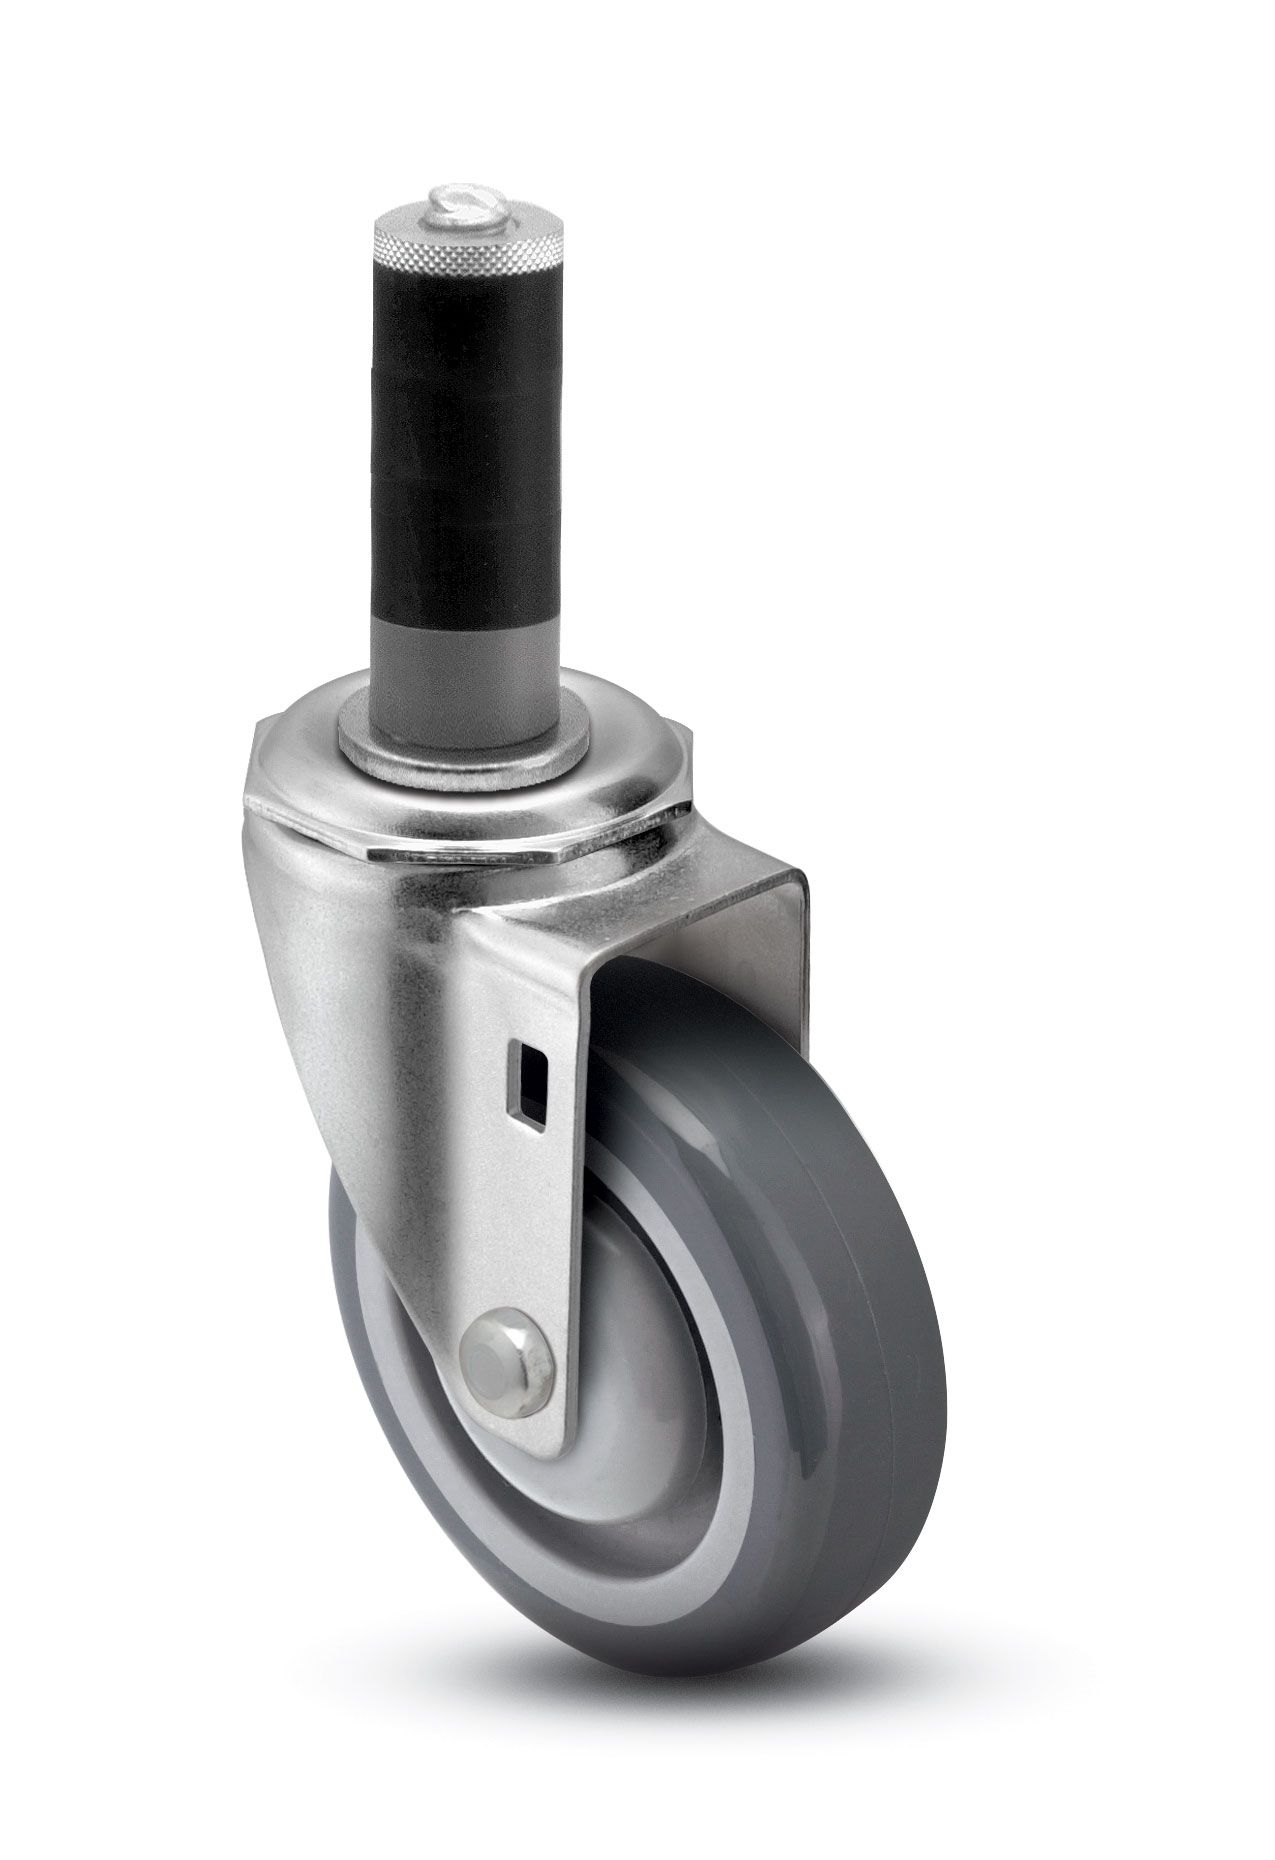 Caster; Swivel; 5" x 1-1/4"; PolyU on PolyO (Gray); Expandable Adapter (1-1/2" - 1-9/16" ID tubing); Zinc; Precision Ball Brng; 300#; Total Lock; Dust Cover (65049)